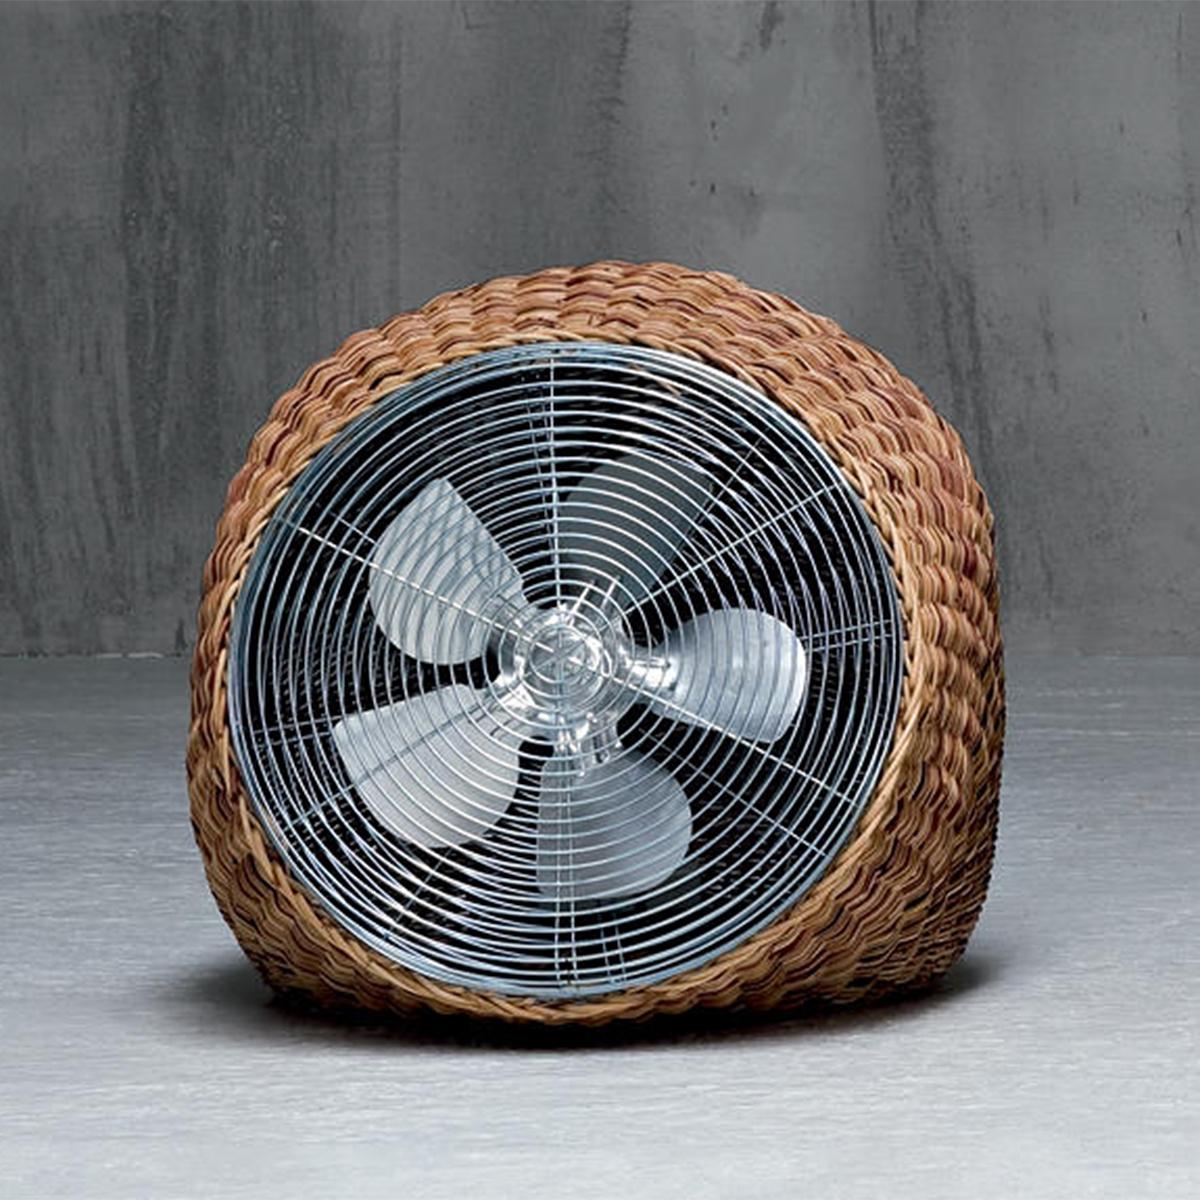 Ventilo Bulrush with handwoven natural bulrush body,
fan system in aluminium. Power 25 Watt, 220 Volt.
Also available wired in 110 Volt, with US plug, on request.
Also available, on request, in Medium size, 
L32xD36xH36cm, price: 1150,00€.